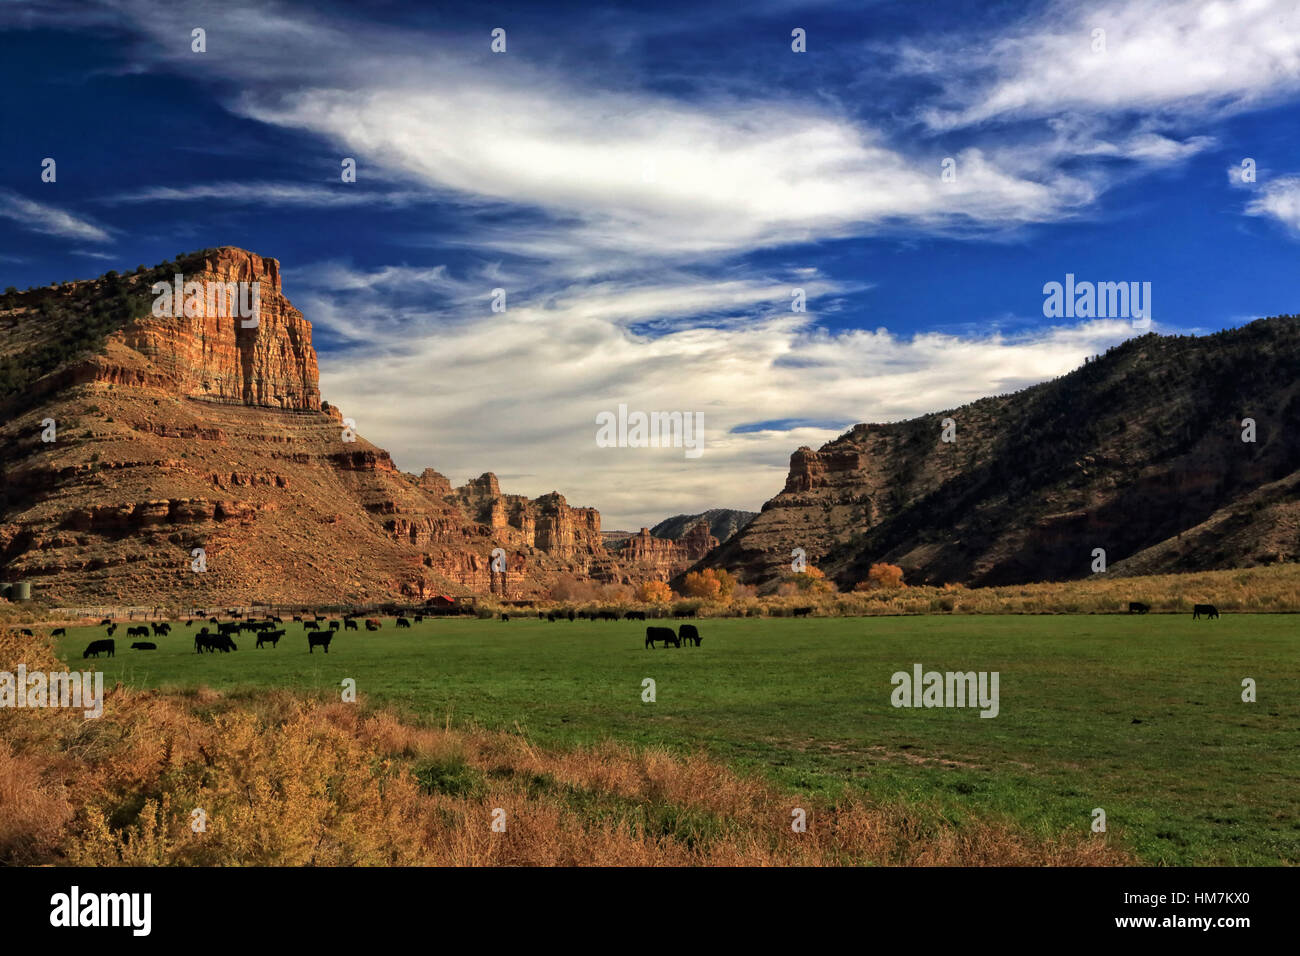 This landscape depicts a green valley within Nine Mile Canyon in Utah. There are dairy cows in the field and blue sky overhead. Stock Photo